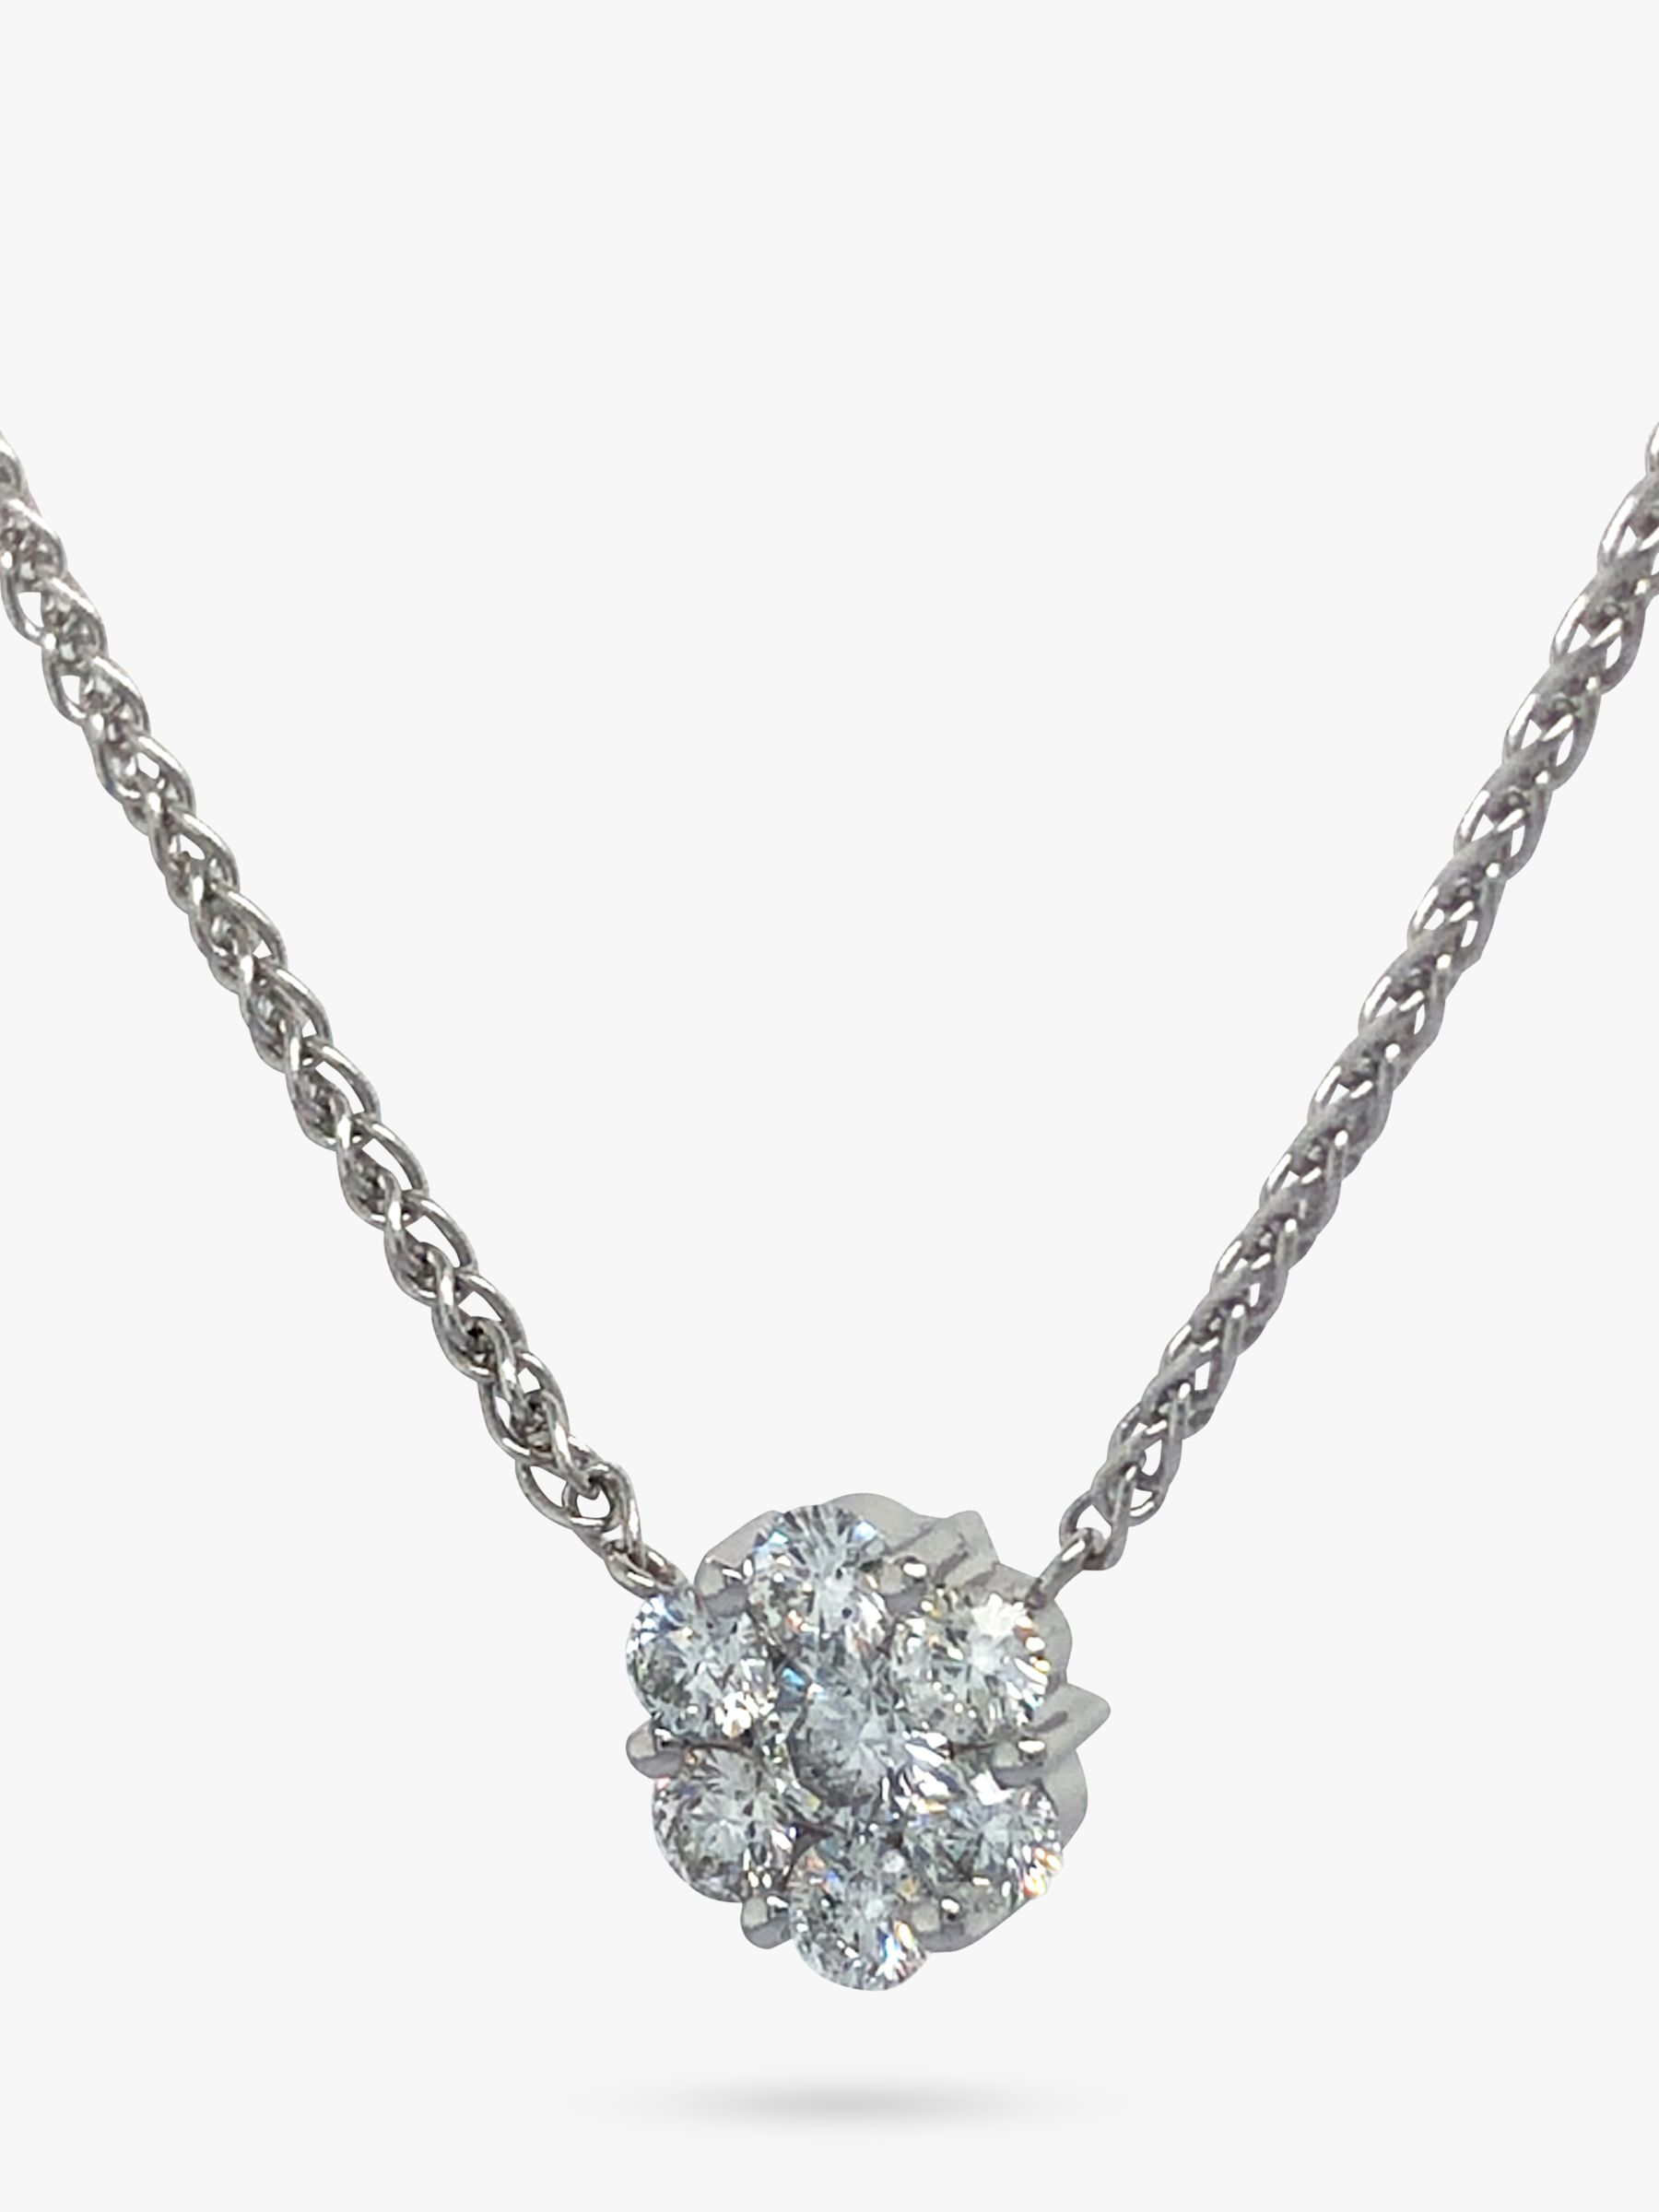 Vintage Fine Jewellery Second Hand 14ct White Gold Diamond Cluster Pendant Necklace